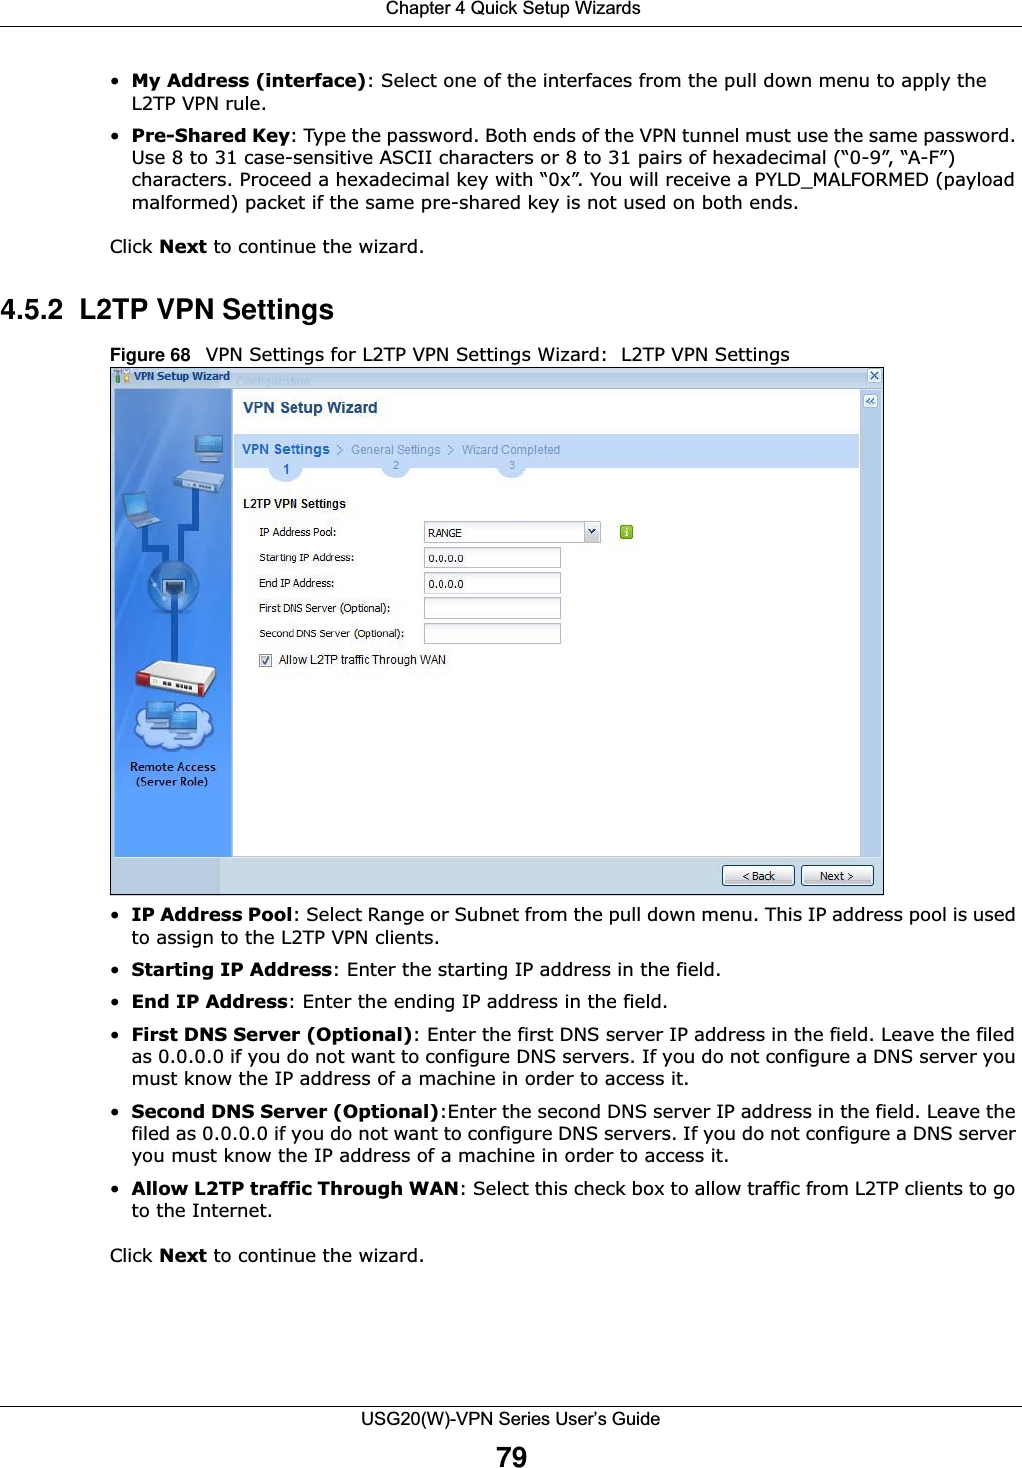  Chapter 4 Quick Setup WizardsUSG20(W)-VPN Series User’s Guide79•My Address (interface): Select one of the interfaces from the pull down menu to apply the L2TP VPN rule.•Pre-Shared Key: Type the password. Both ends of the VPN tunnel must use the same password. Use 8 to 31 case-sensitive ASCII characters or 8 to 31 pairs of hexadecimal (“0-9”, “A-F”) characters. Proceed a hexadecimal key with “0x”. You will receive a PYLD_MALFORMED (payload malformed) packet if the same pre-shared key is not used on both ends.Click Next to continue the wizard.4.5.2  L2TP VPN SettingsFigure 68   VPN Settings for L2TP VPN Settings Wizard:  L2TP VPN Settings•IP Address Pool: Select Range or Subnet from the pull down menu. This IP address pool is used to assign to the L2TP VPN clients.•Starting IP Address: Enter the starting IP address in the field.•End IP Address: Enter the ending IP address in the field.•First DNS Server (Optional): Enter the first DNS server IP address in the field. Leave the filed as 0.0.0.0 if you do not want to configure DNS servers. If you do not configure a DNS server you must know the IP address of a machine in order to access it.•Second DNS Server (Optional):Enter the second DNS server IP address in the field. Leave the filed as 0.0.0.0 if you do not want to configure DNS servers. If you do not configure a DNS server you must know the IP address of a machine in order to access it.•Allow L2TP traffic Through WAN: Select this check box to allow traffic from L2TP clients to go to the Internet.  Click Next to continue the wizard.